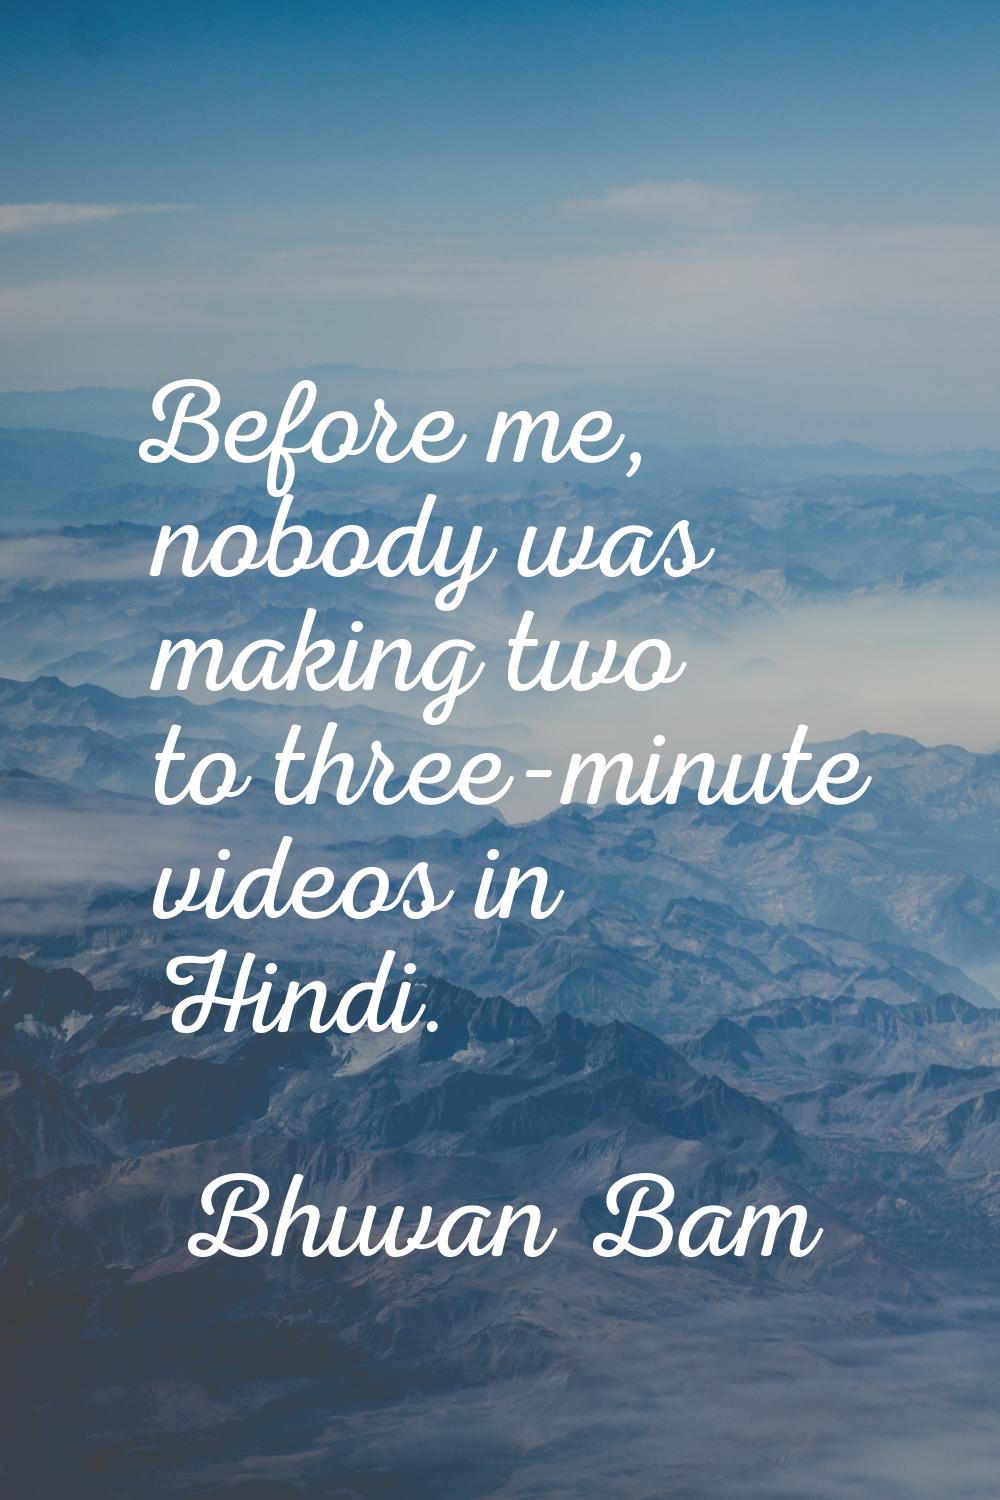 Before me, nobody was making two to three-minute videos in Hindi.